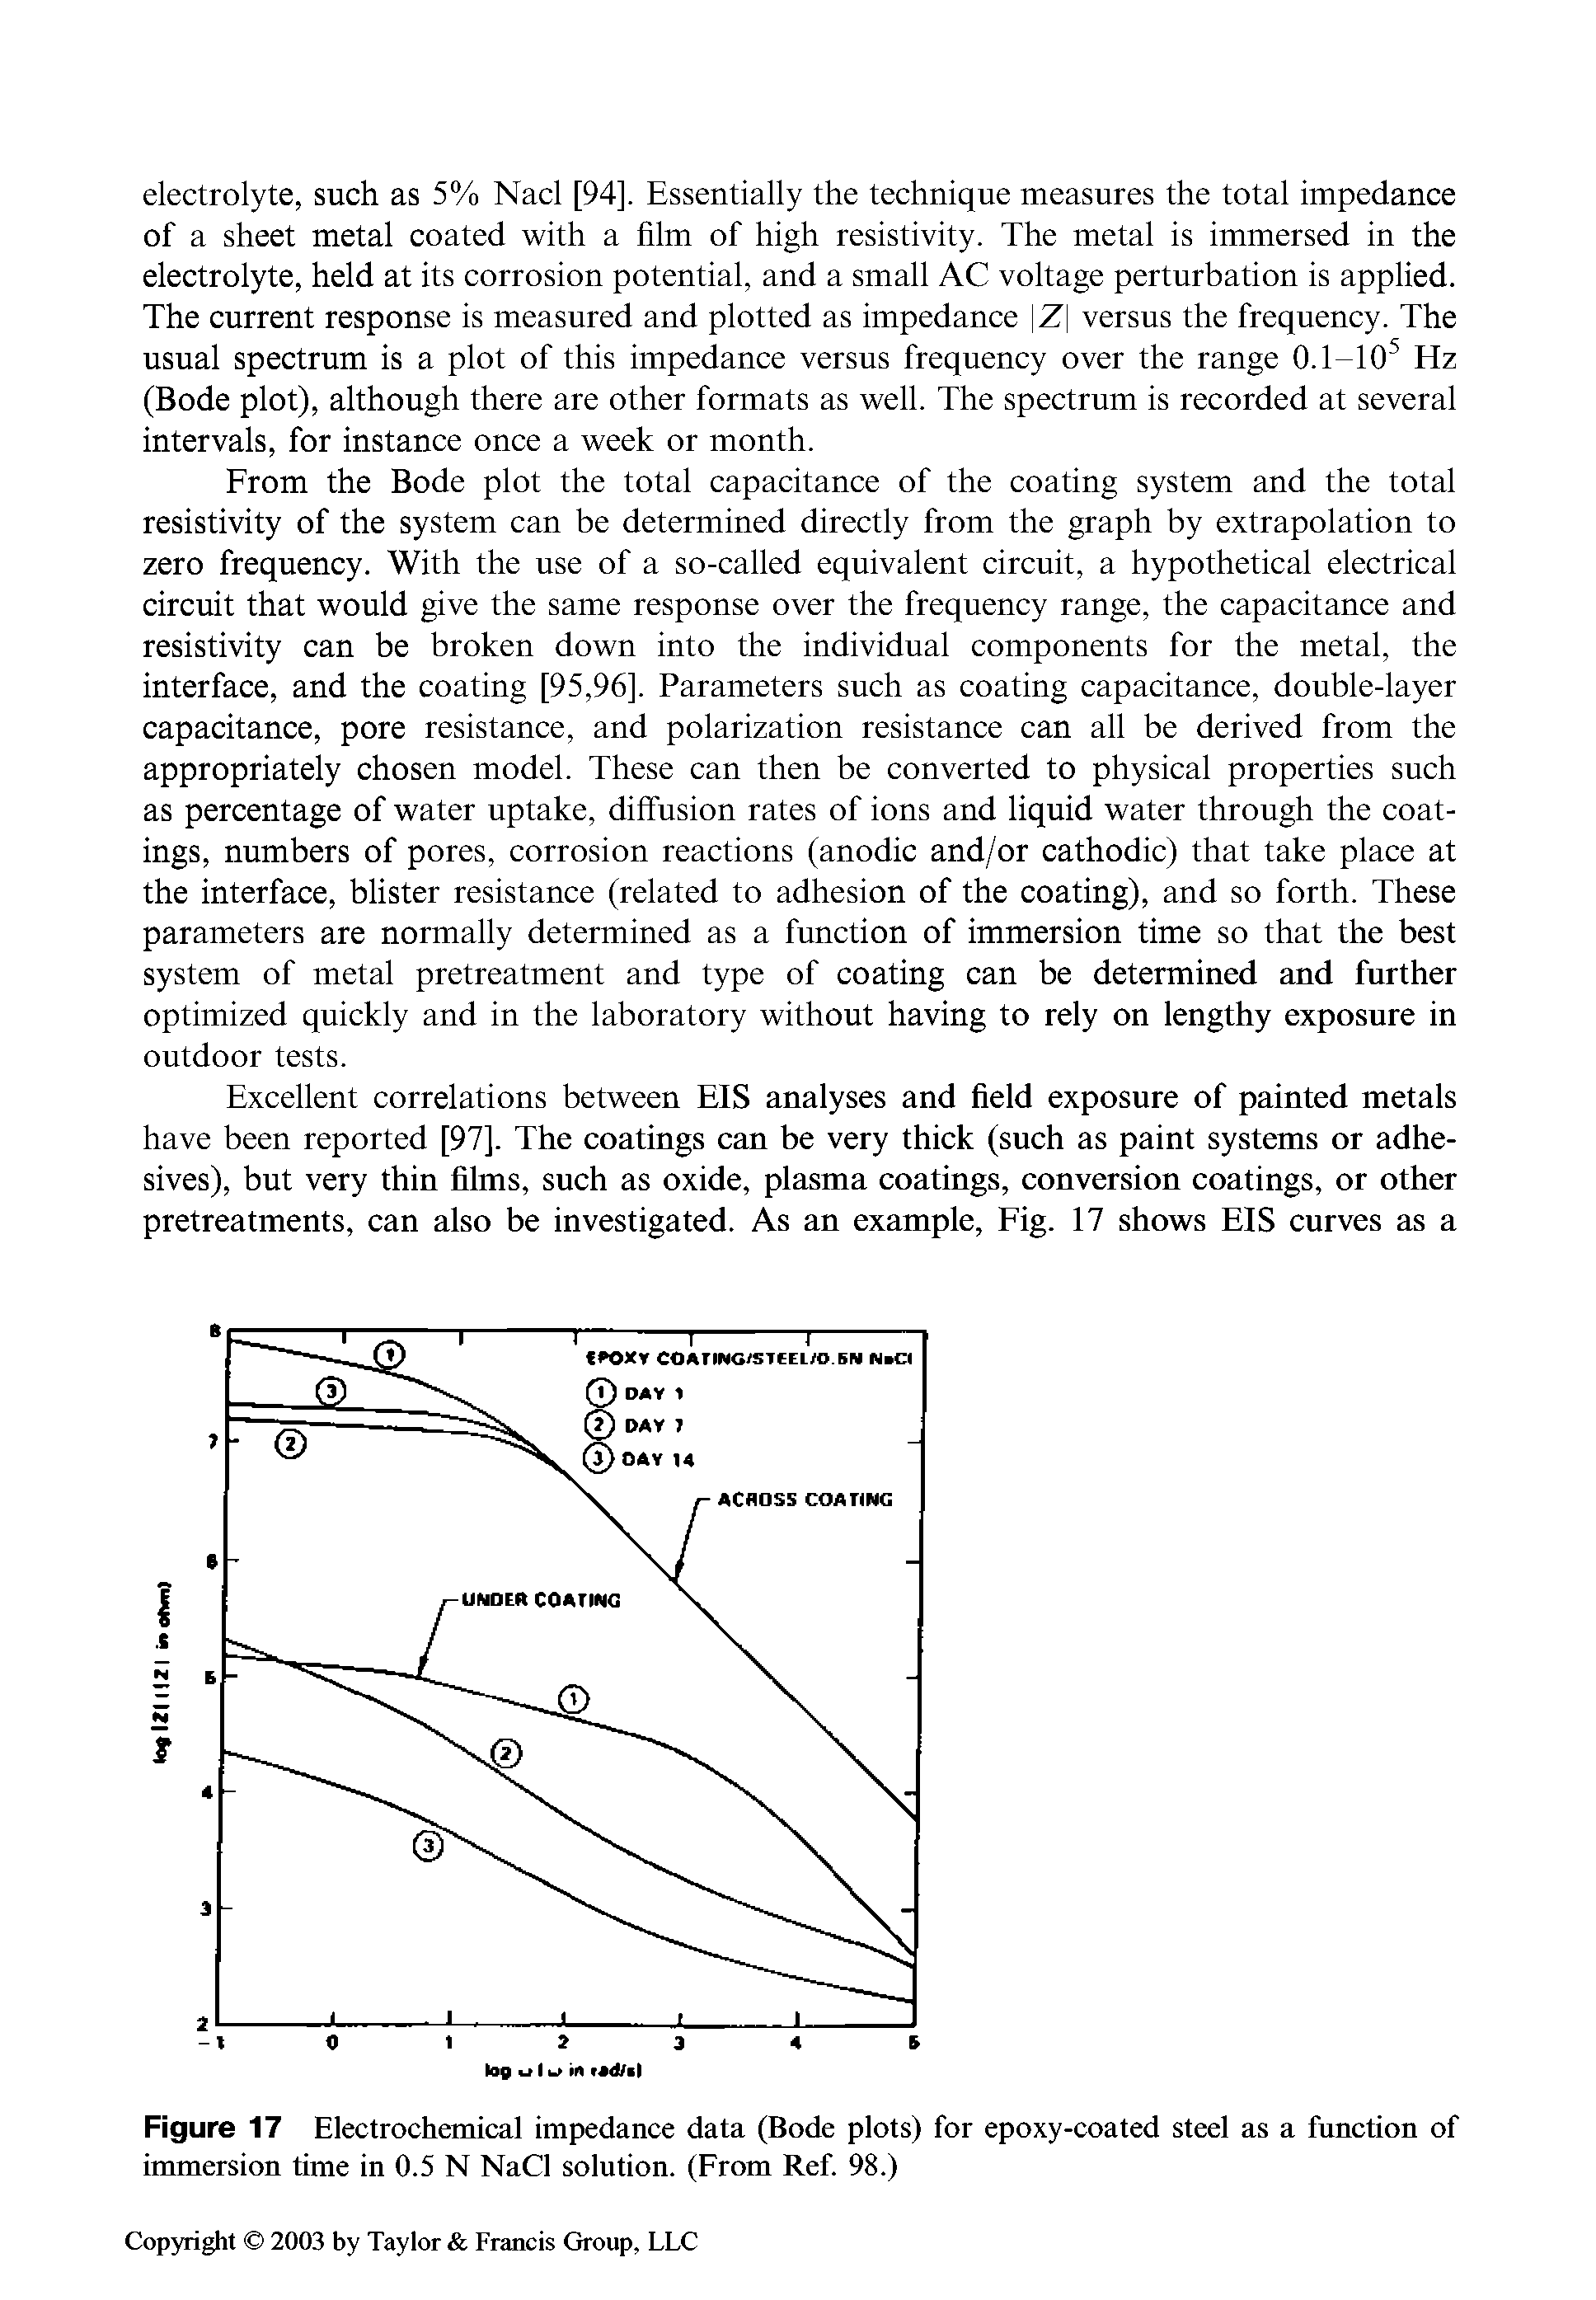 Figure 17 Electrochemical impedance data (Bode plots) for epoxy-coated steel as a function of immersion time in 0.5 N NaCl solution. (From Ref. 98.)...